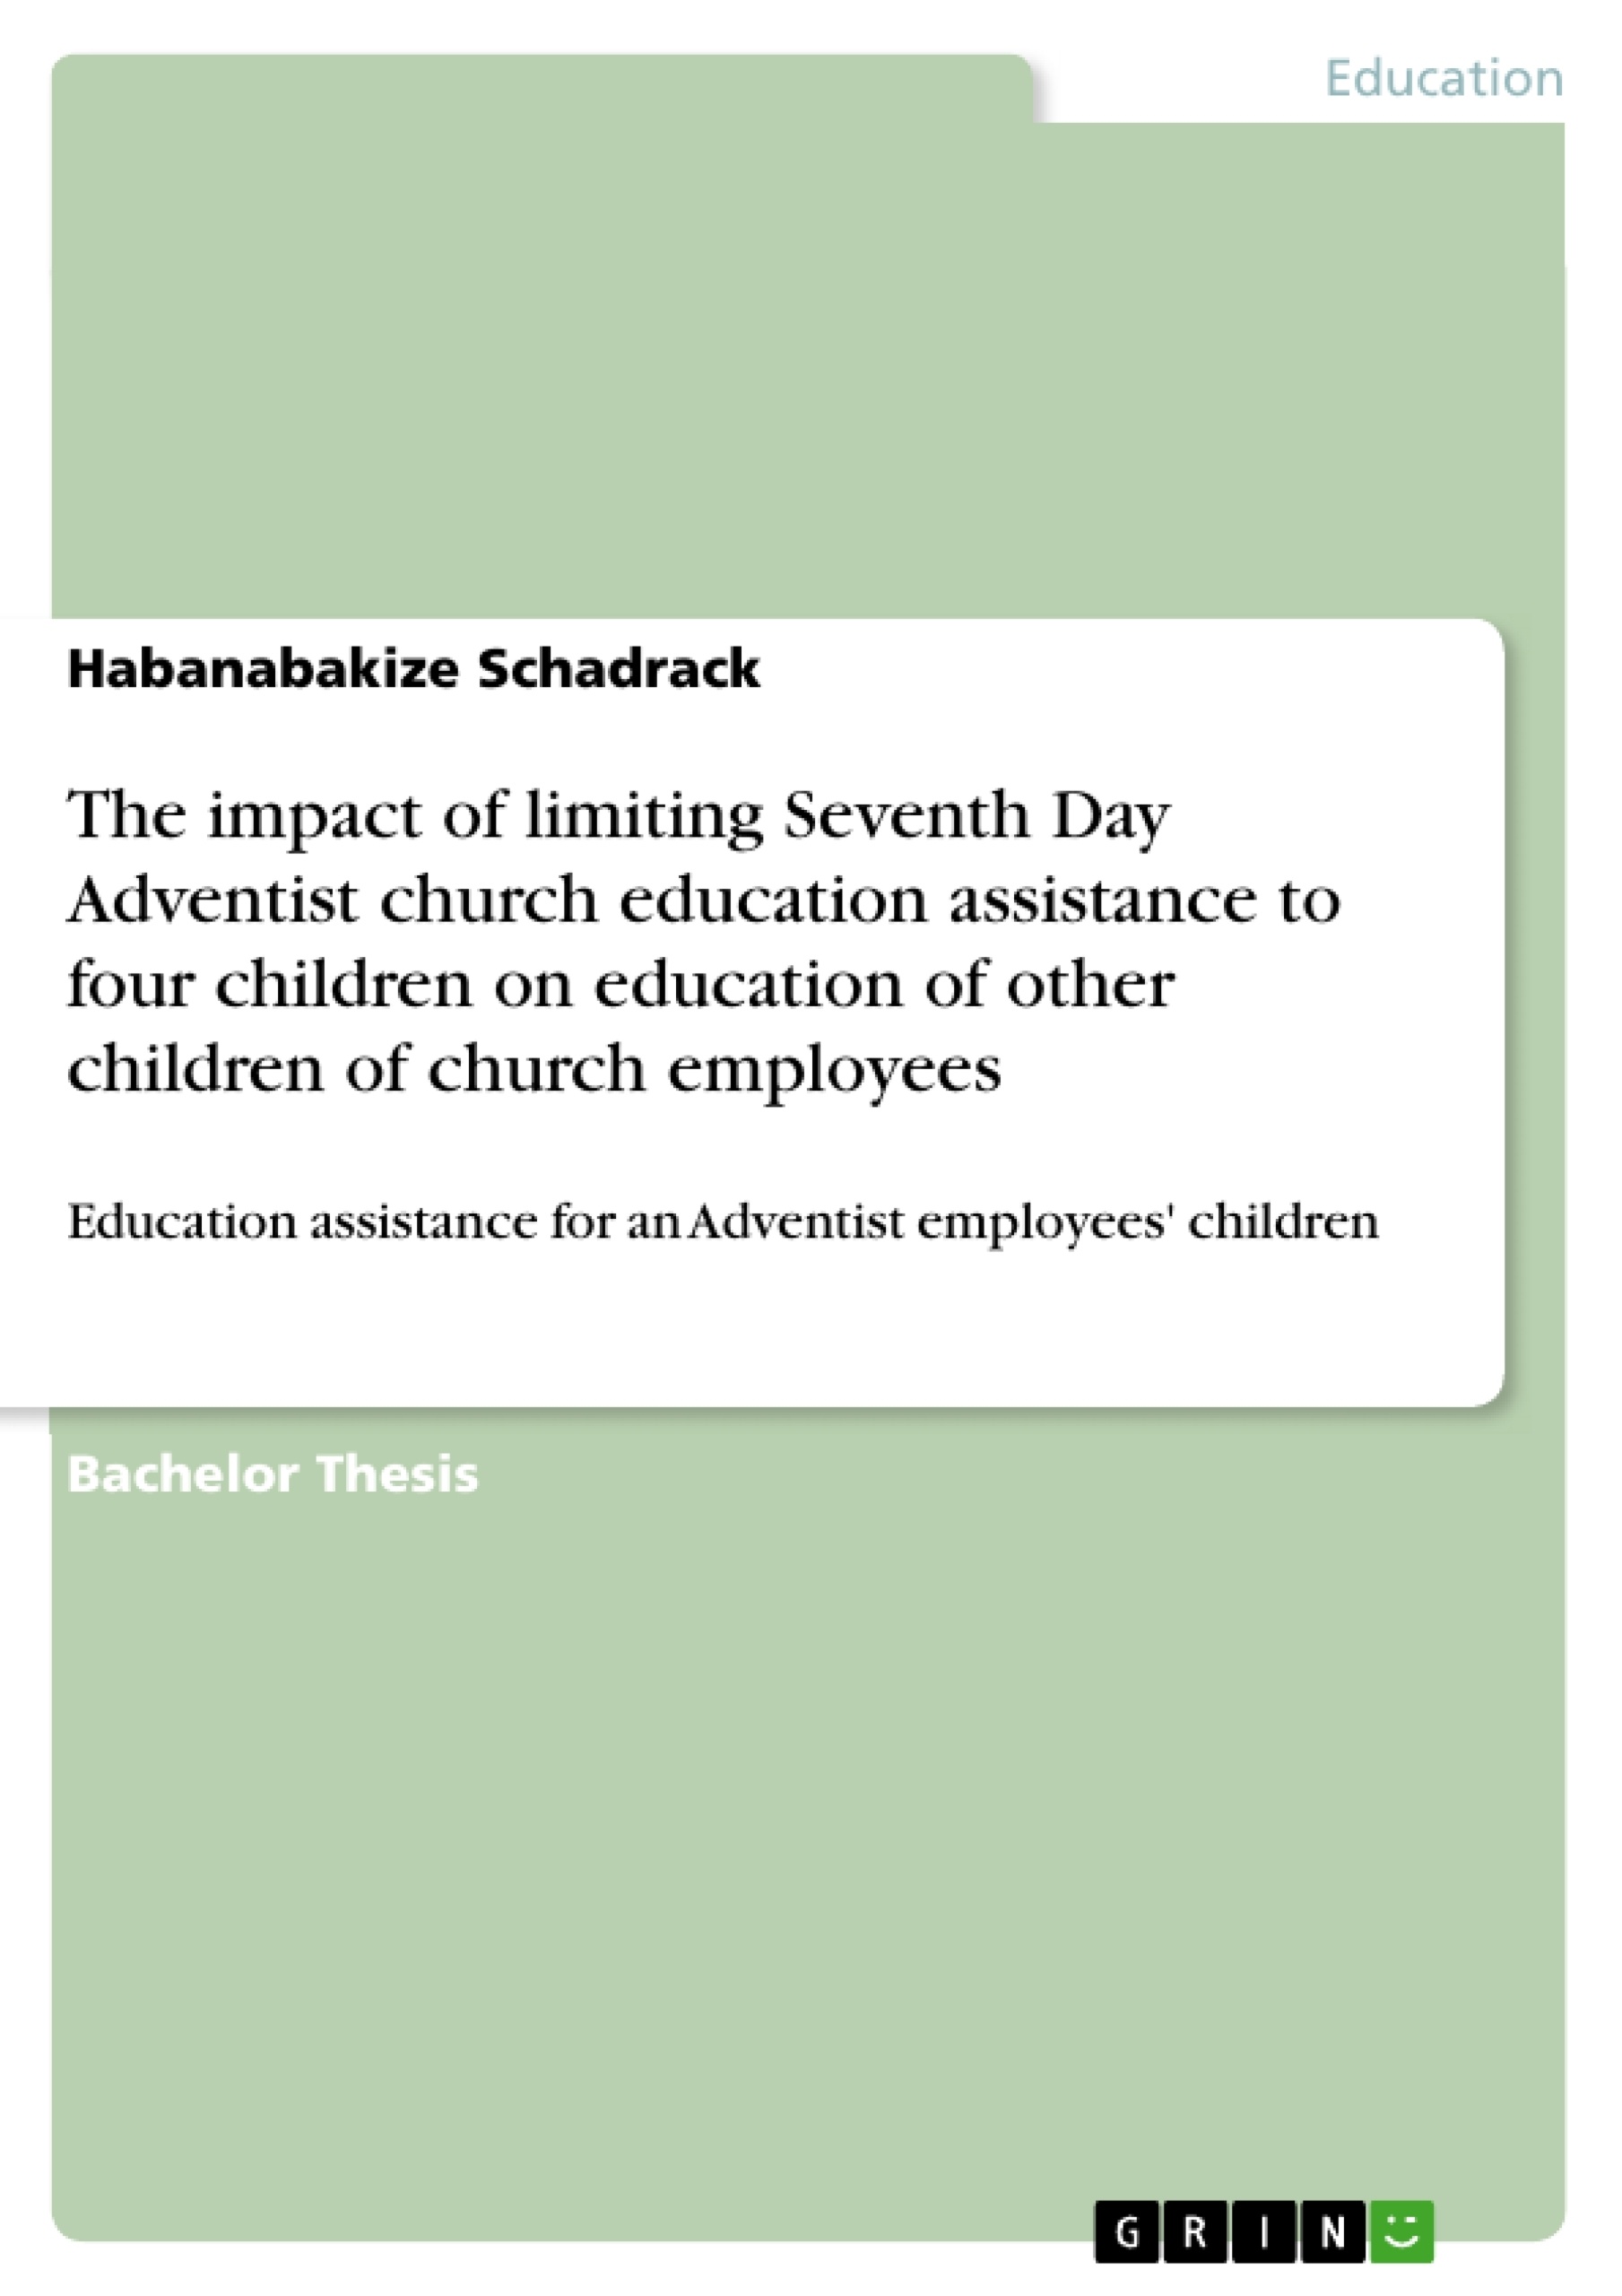 Título: The impact of limiting Seventh Day Adventist church education assistance to four children on education of other children of church employees